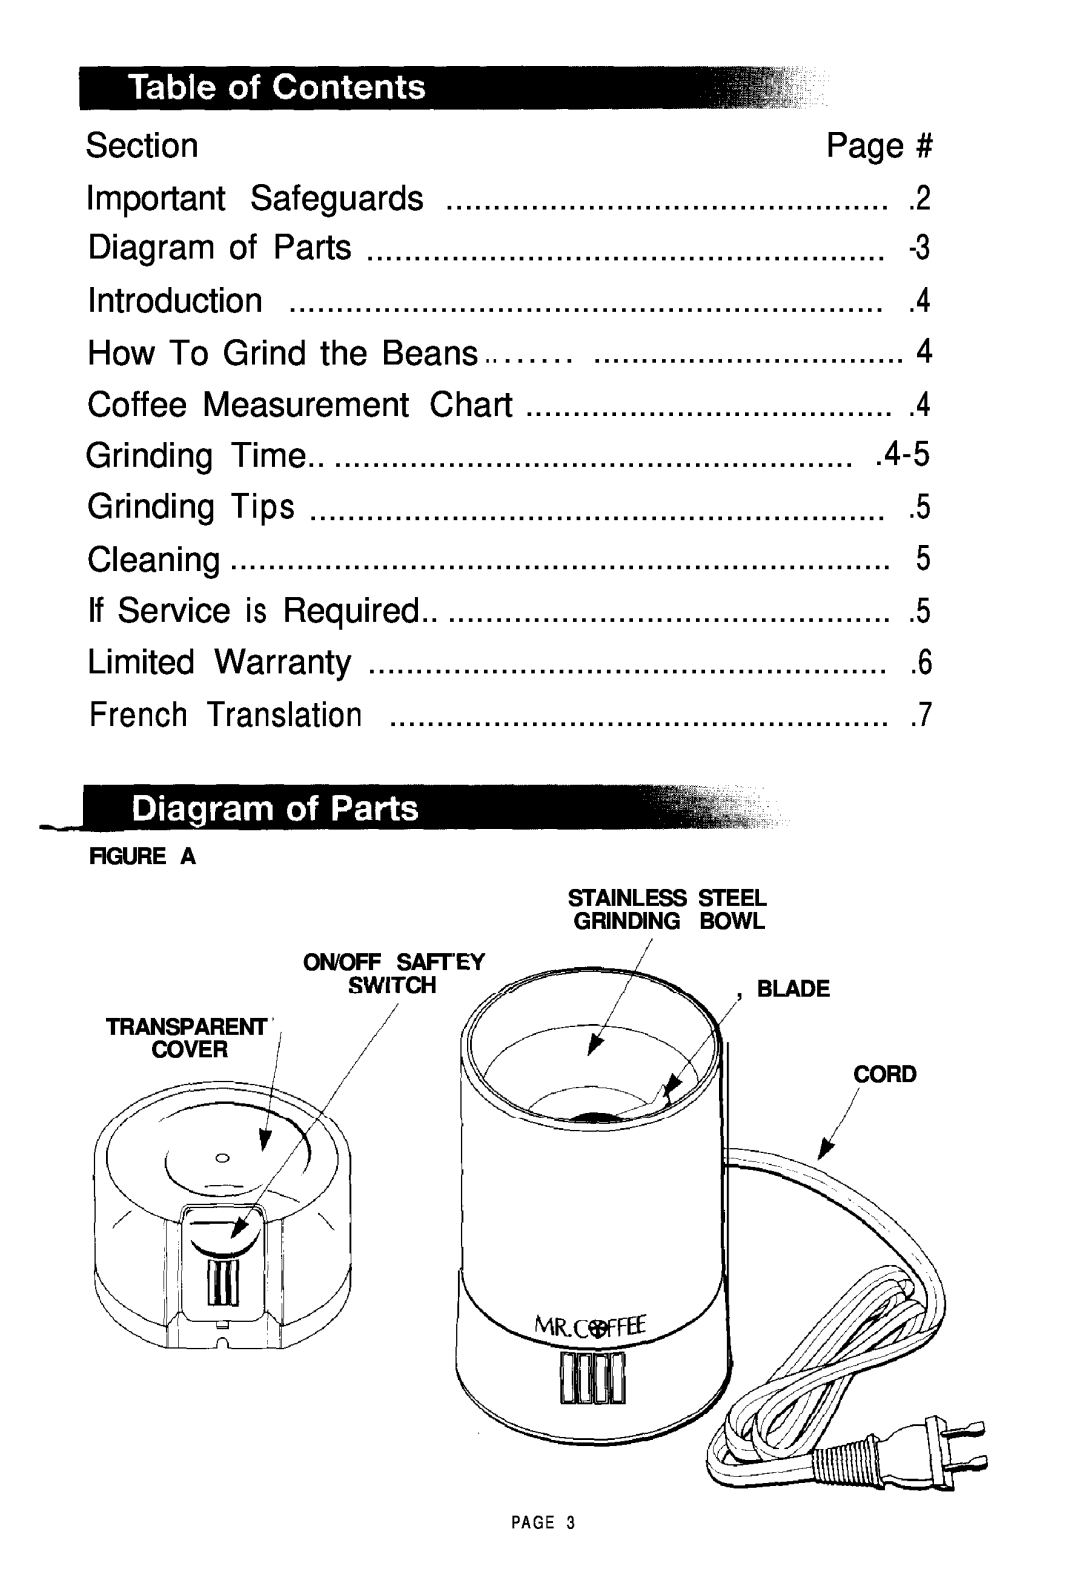 Mr. Coffee COFFEE MILL manual Section 